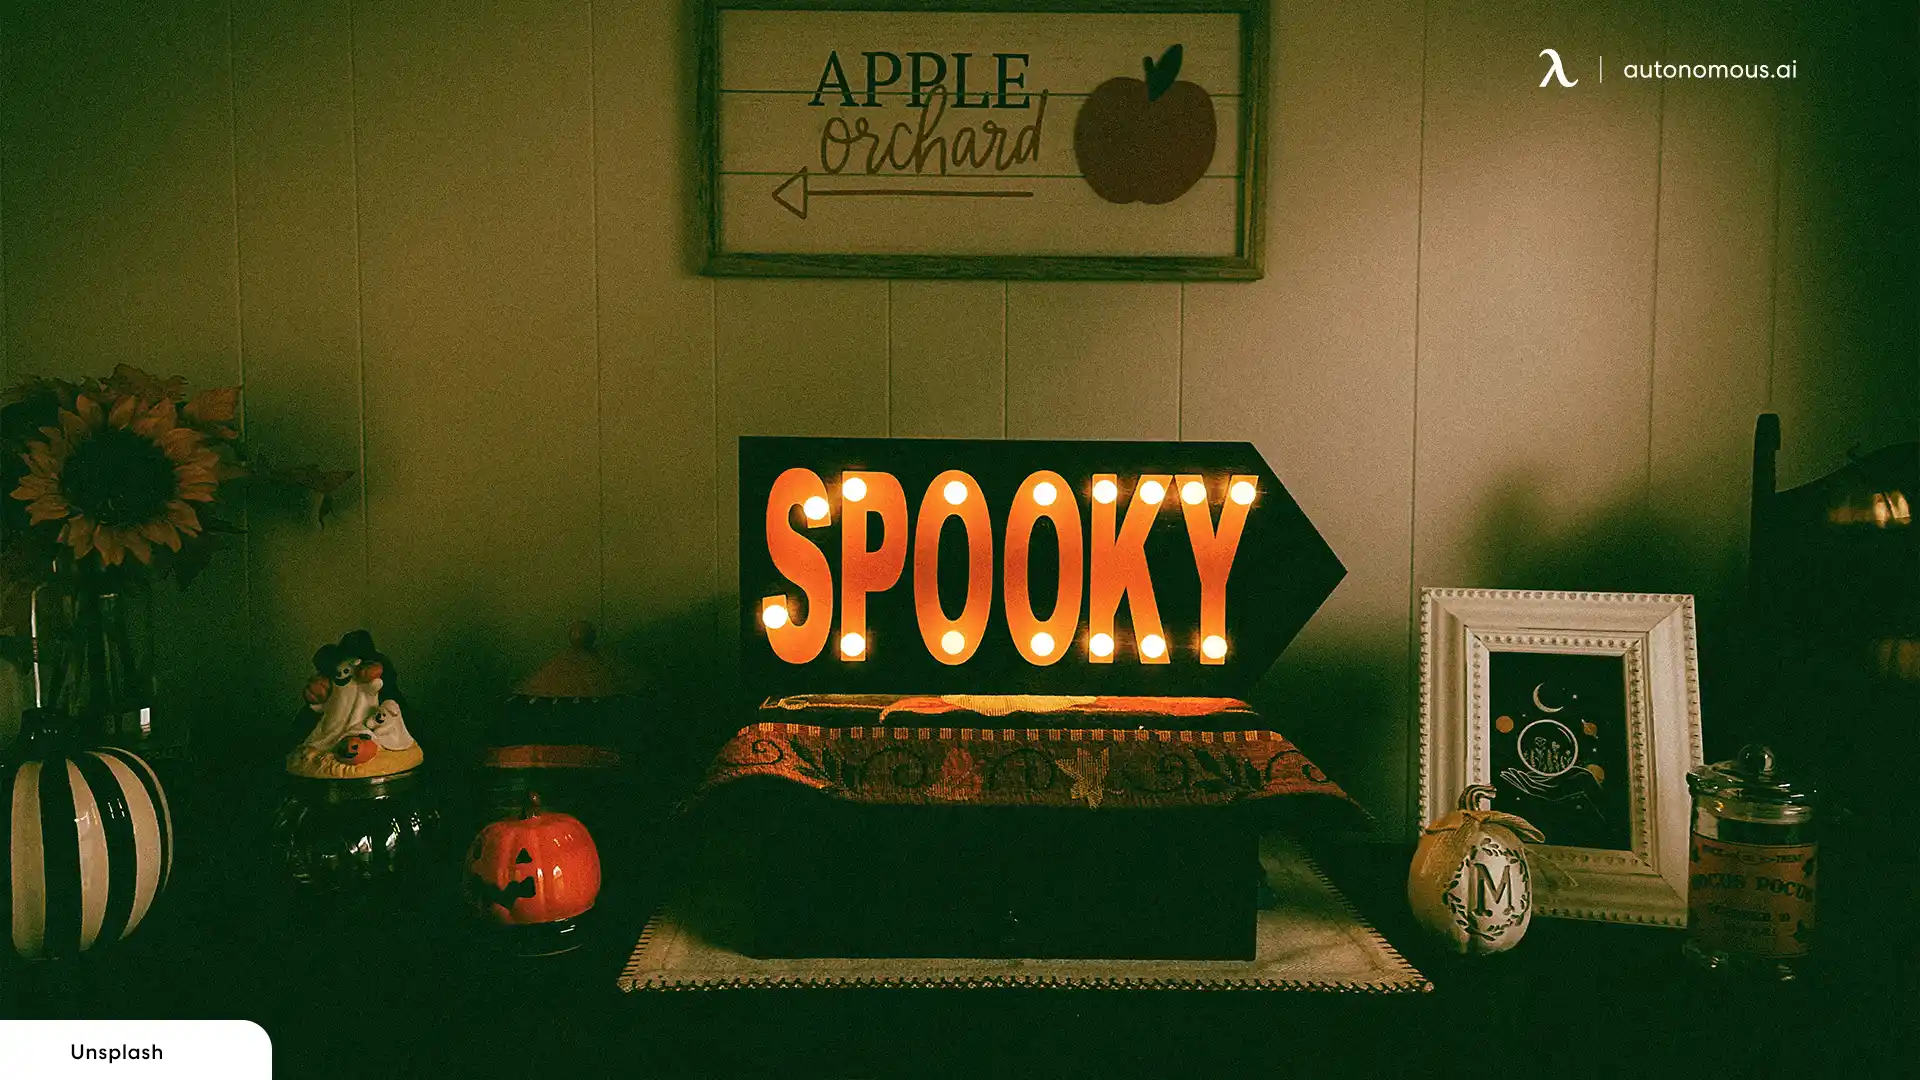 Decorate Your Home Office Desk with Some Spooky Artwork